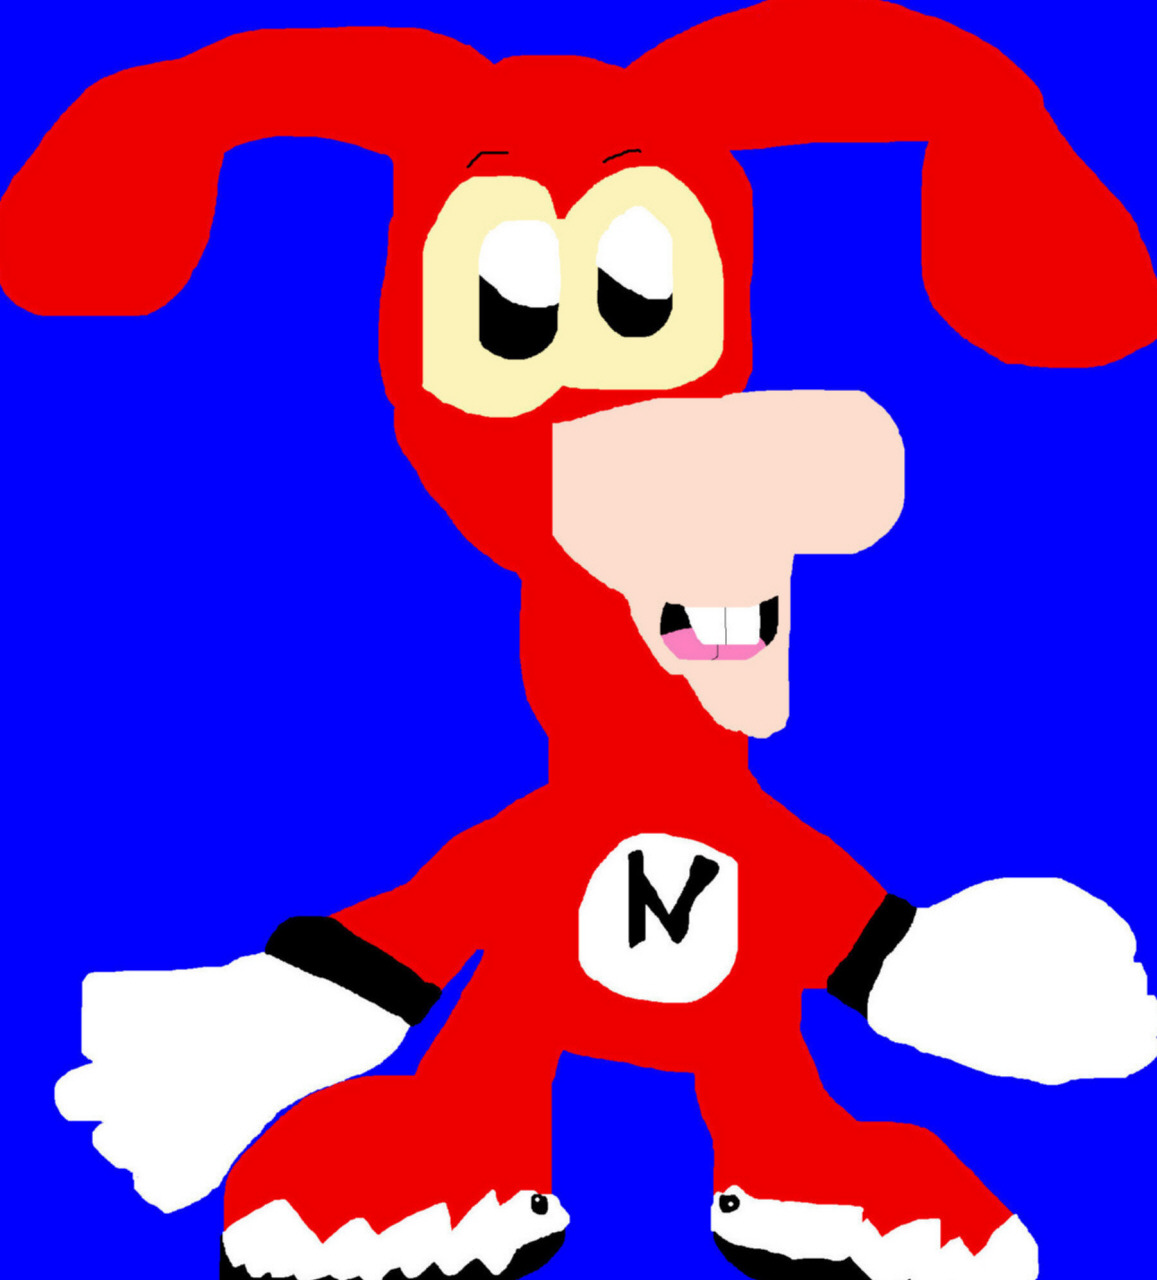 Extremely Chibi Noid MS Paint by Falconlobo